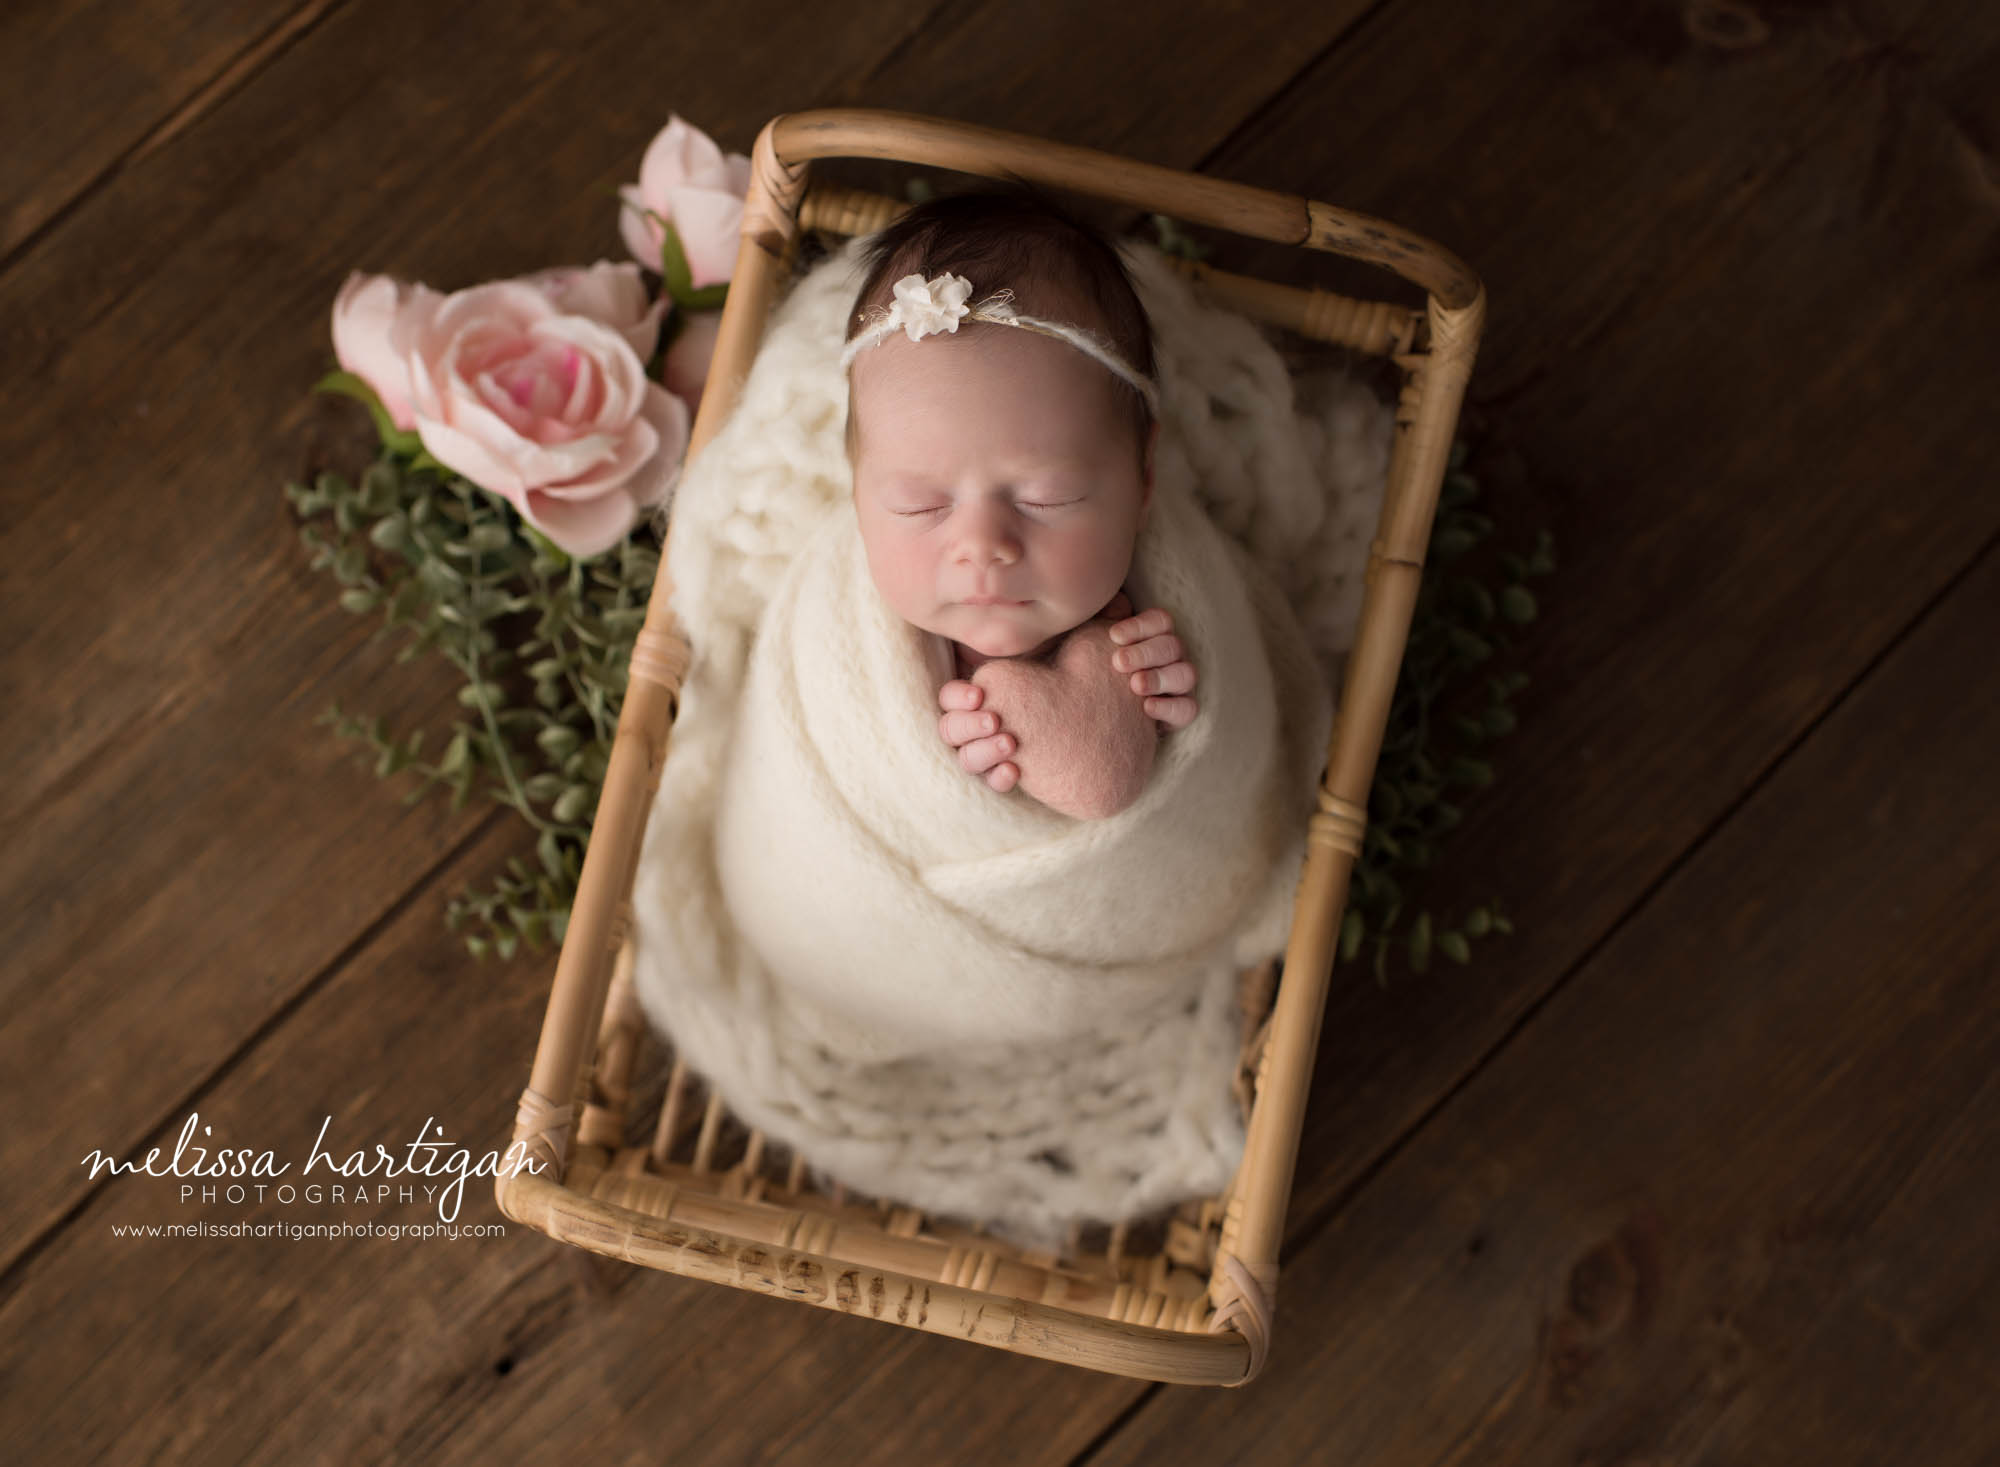 newborn baby girl wrapped in cream knit wrap posed in basket with pink flowers beside basket